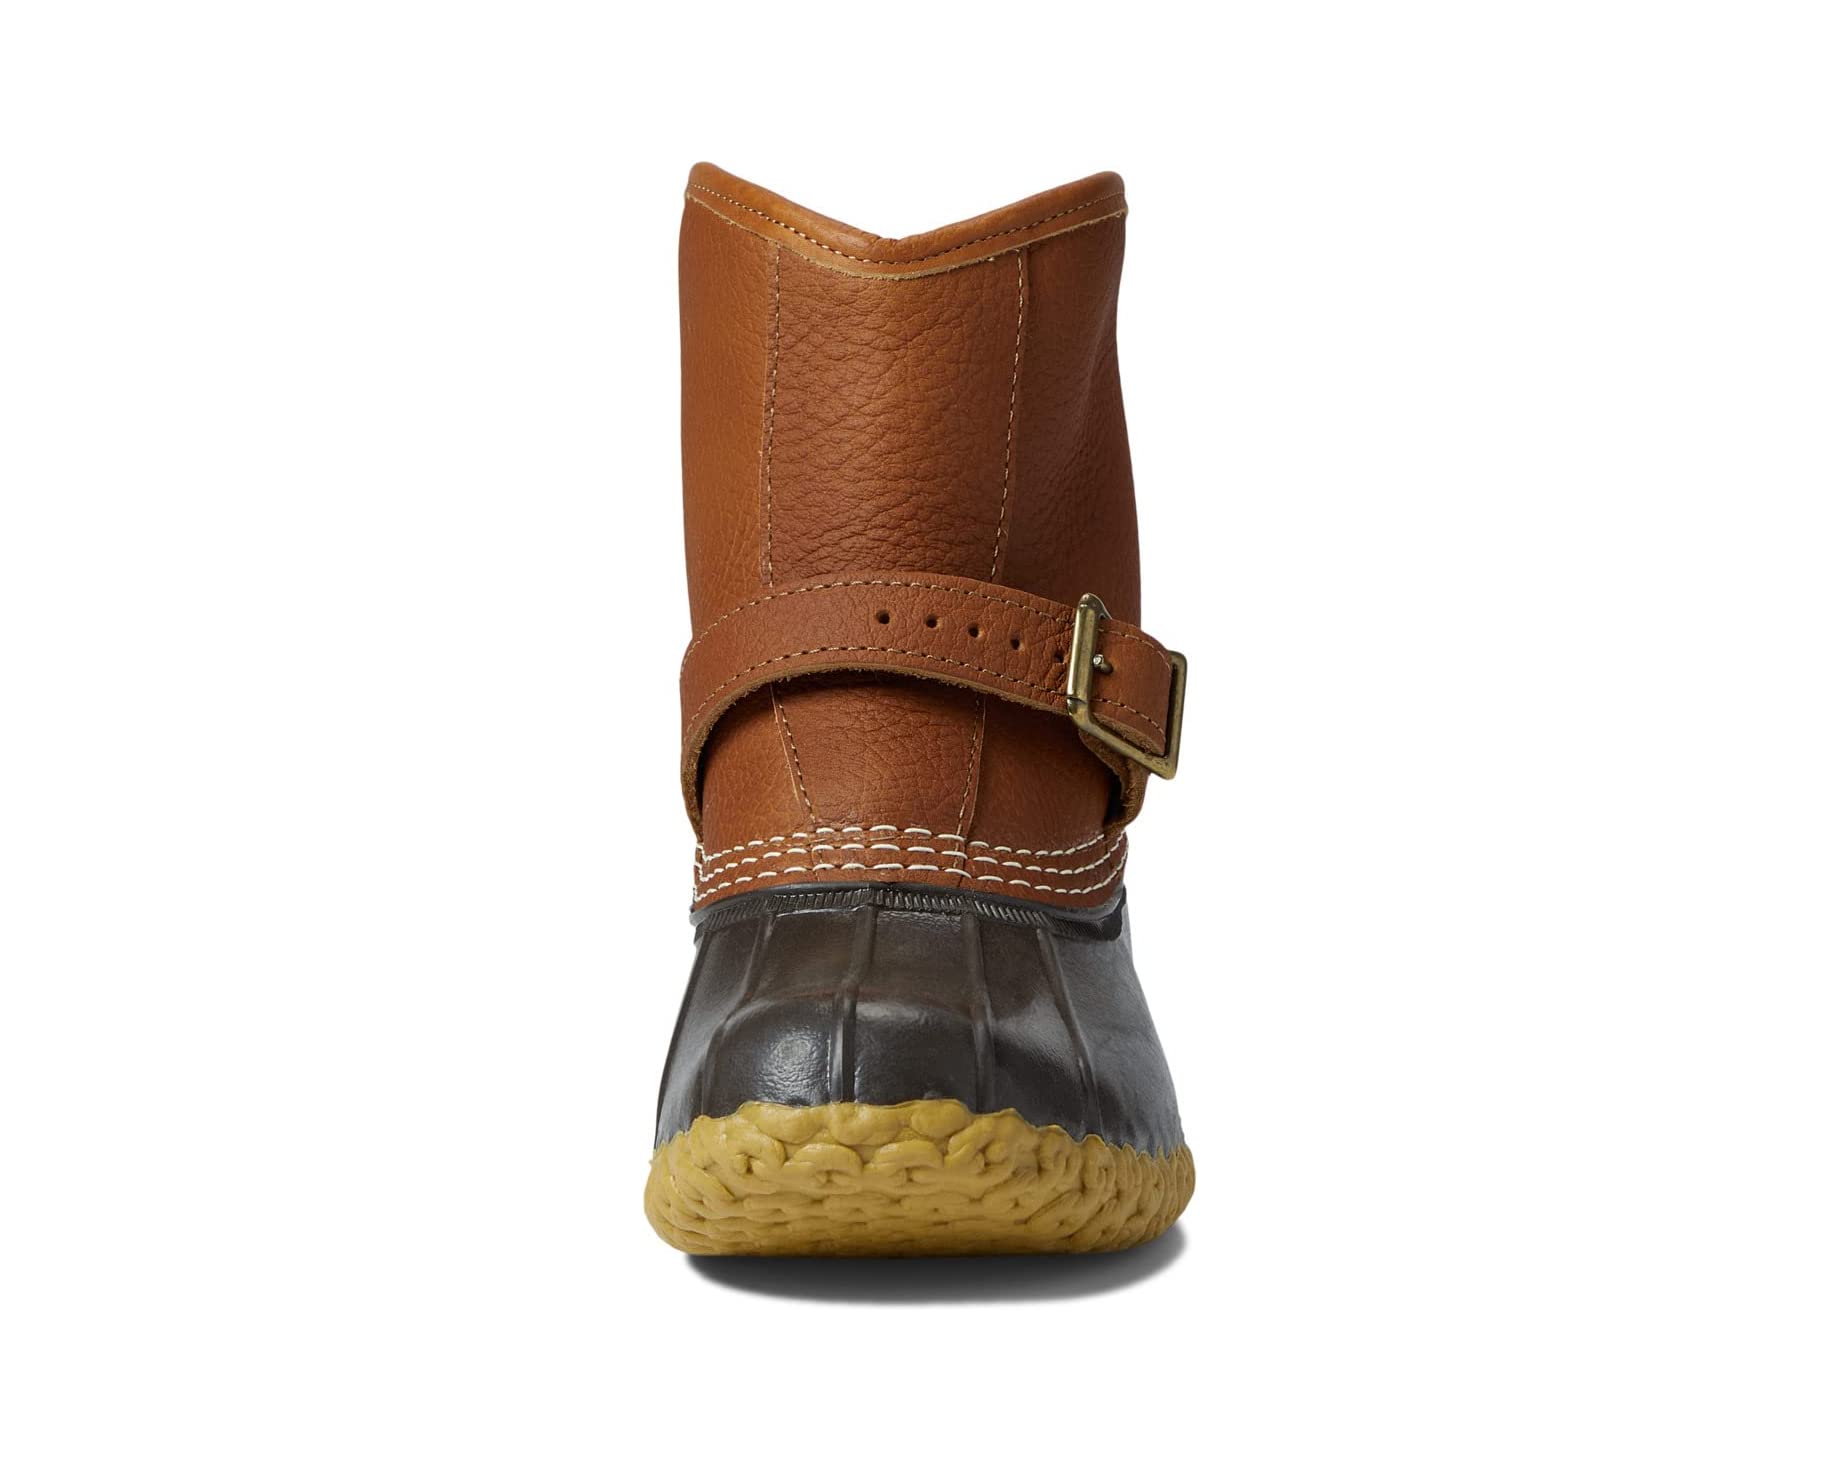 Ботинки Bean Boot 7 Lounger Limited Edition Tumbled Leather Shearling Lined Insulated L.L.Bean, тан